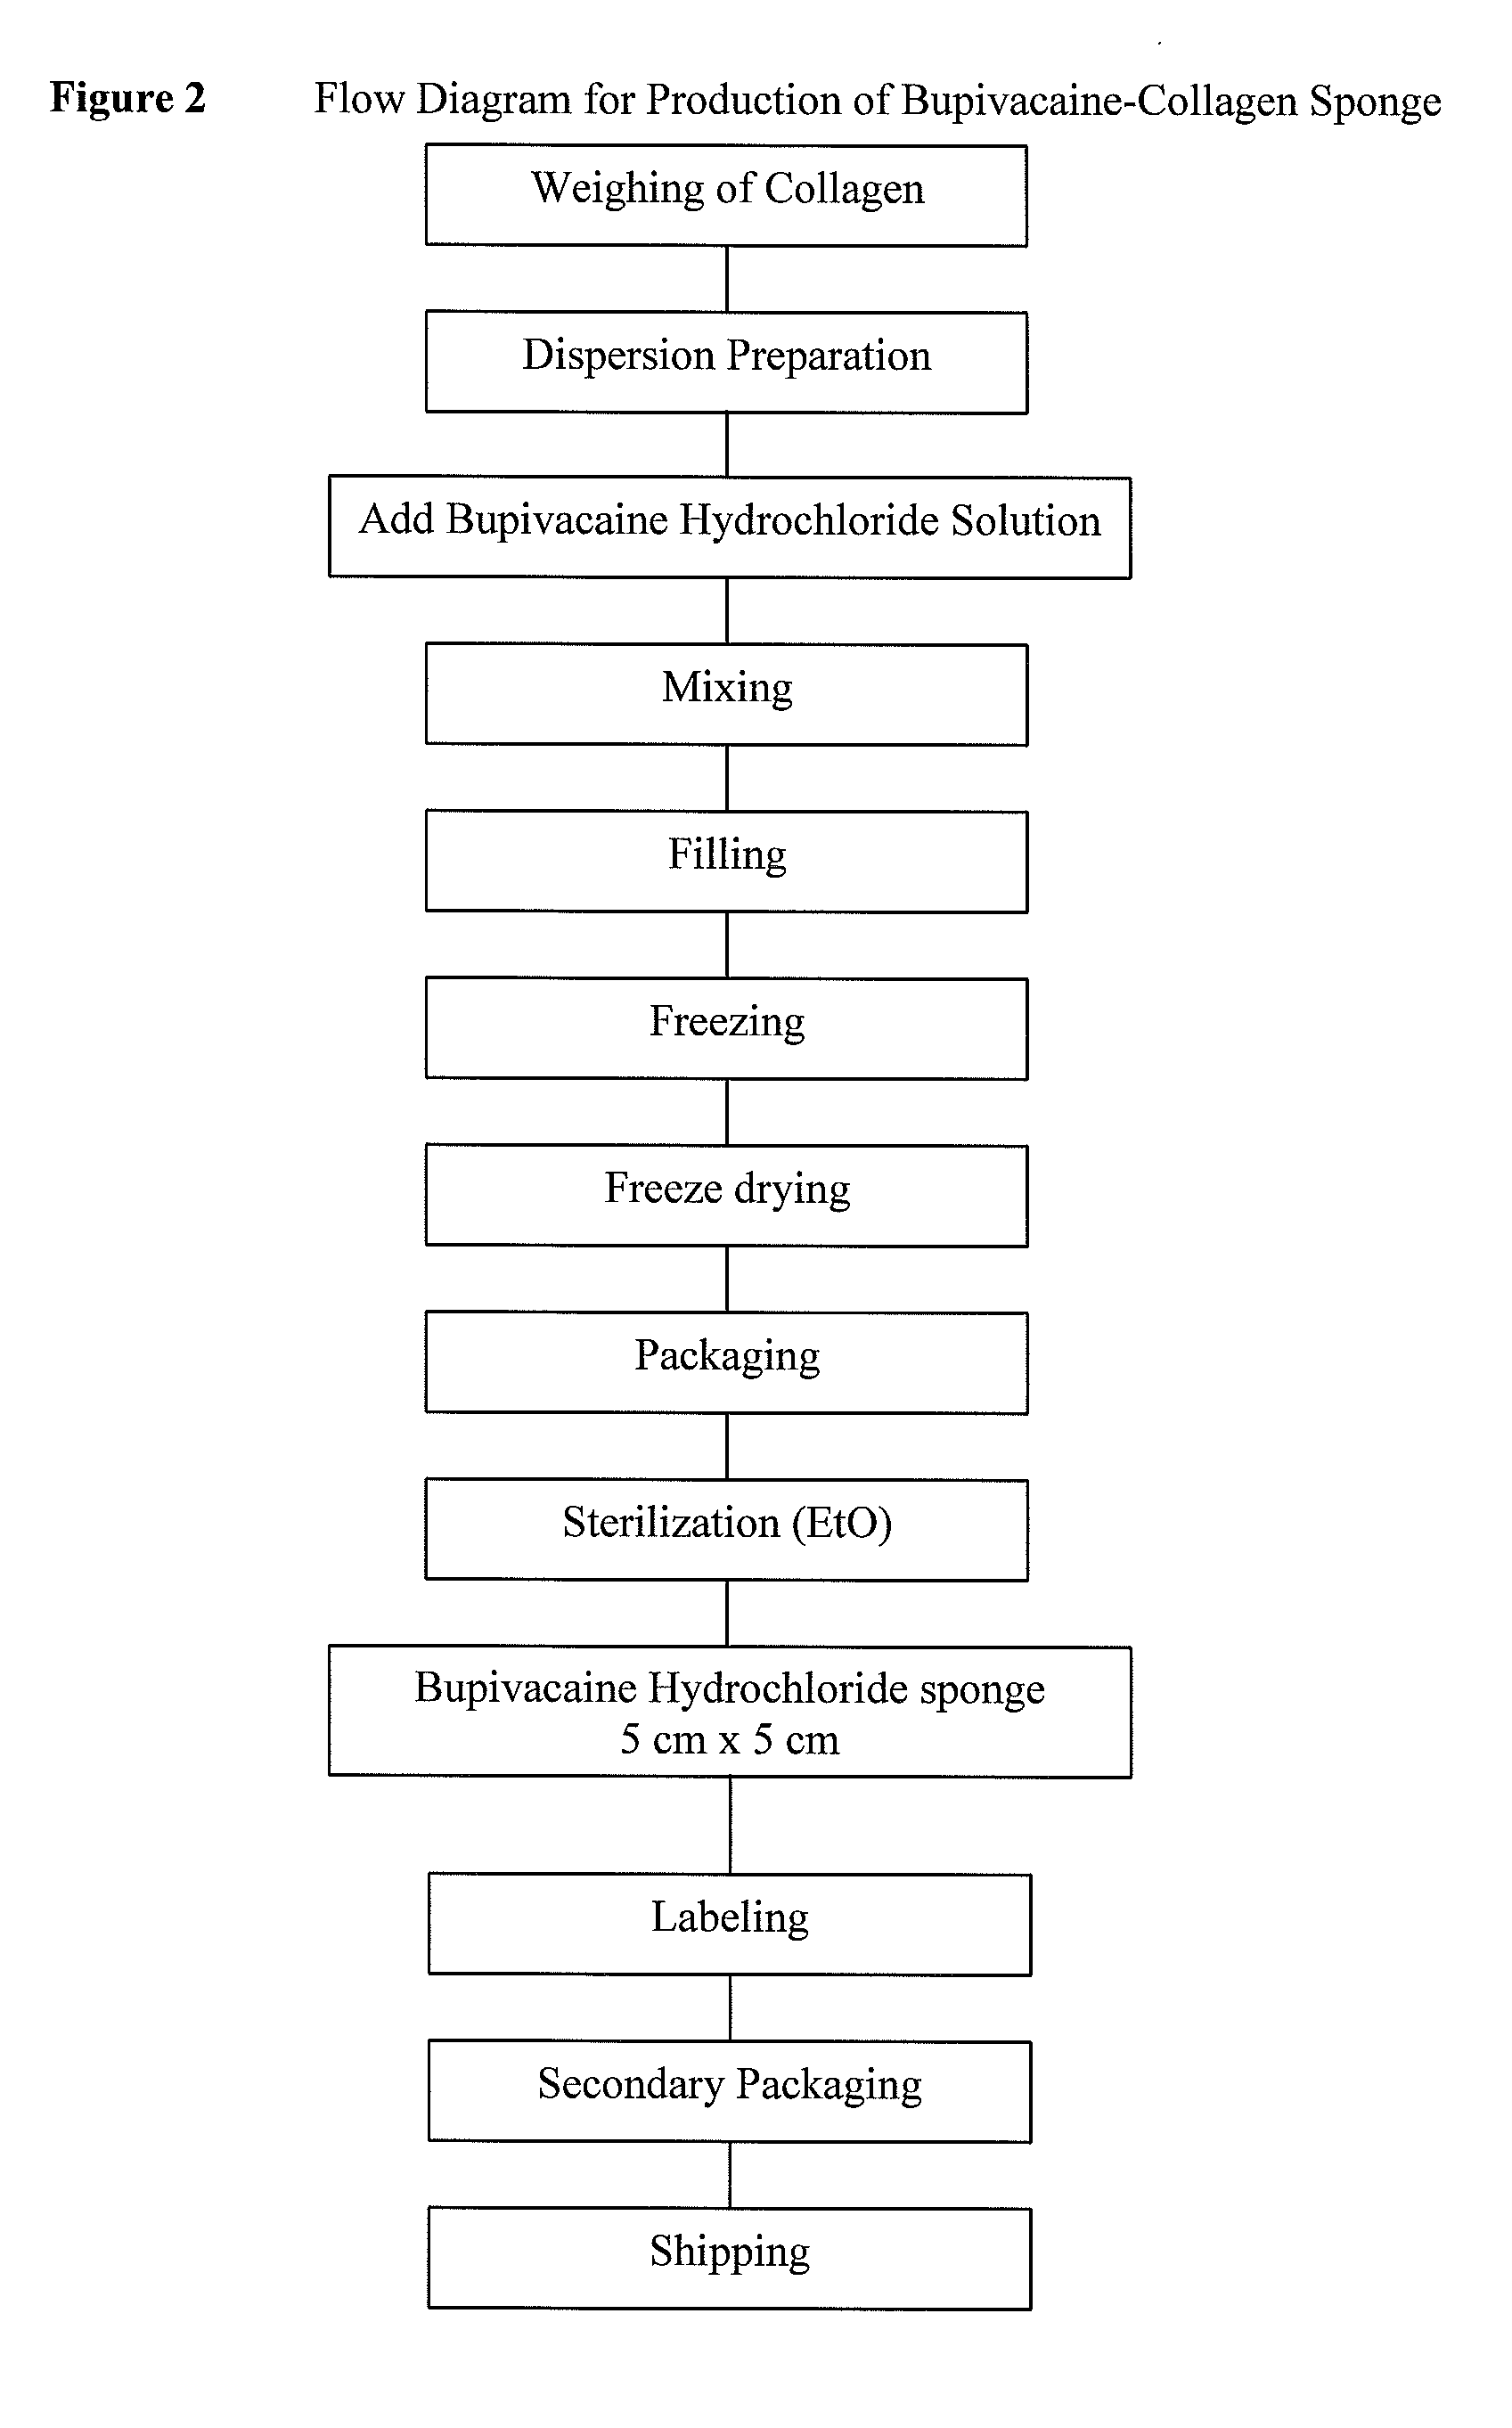 Drug delivery device for providing local analgesia, local anesthesia or nerve blockage